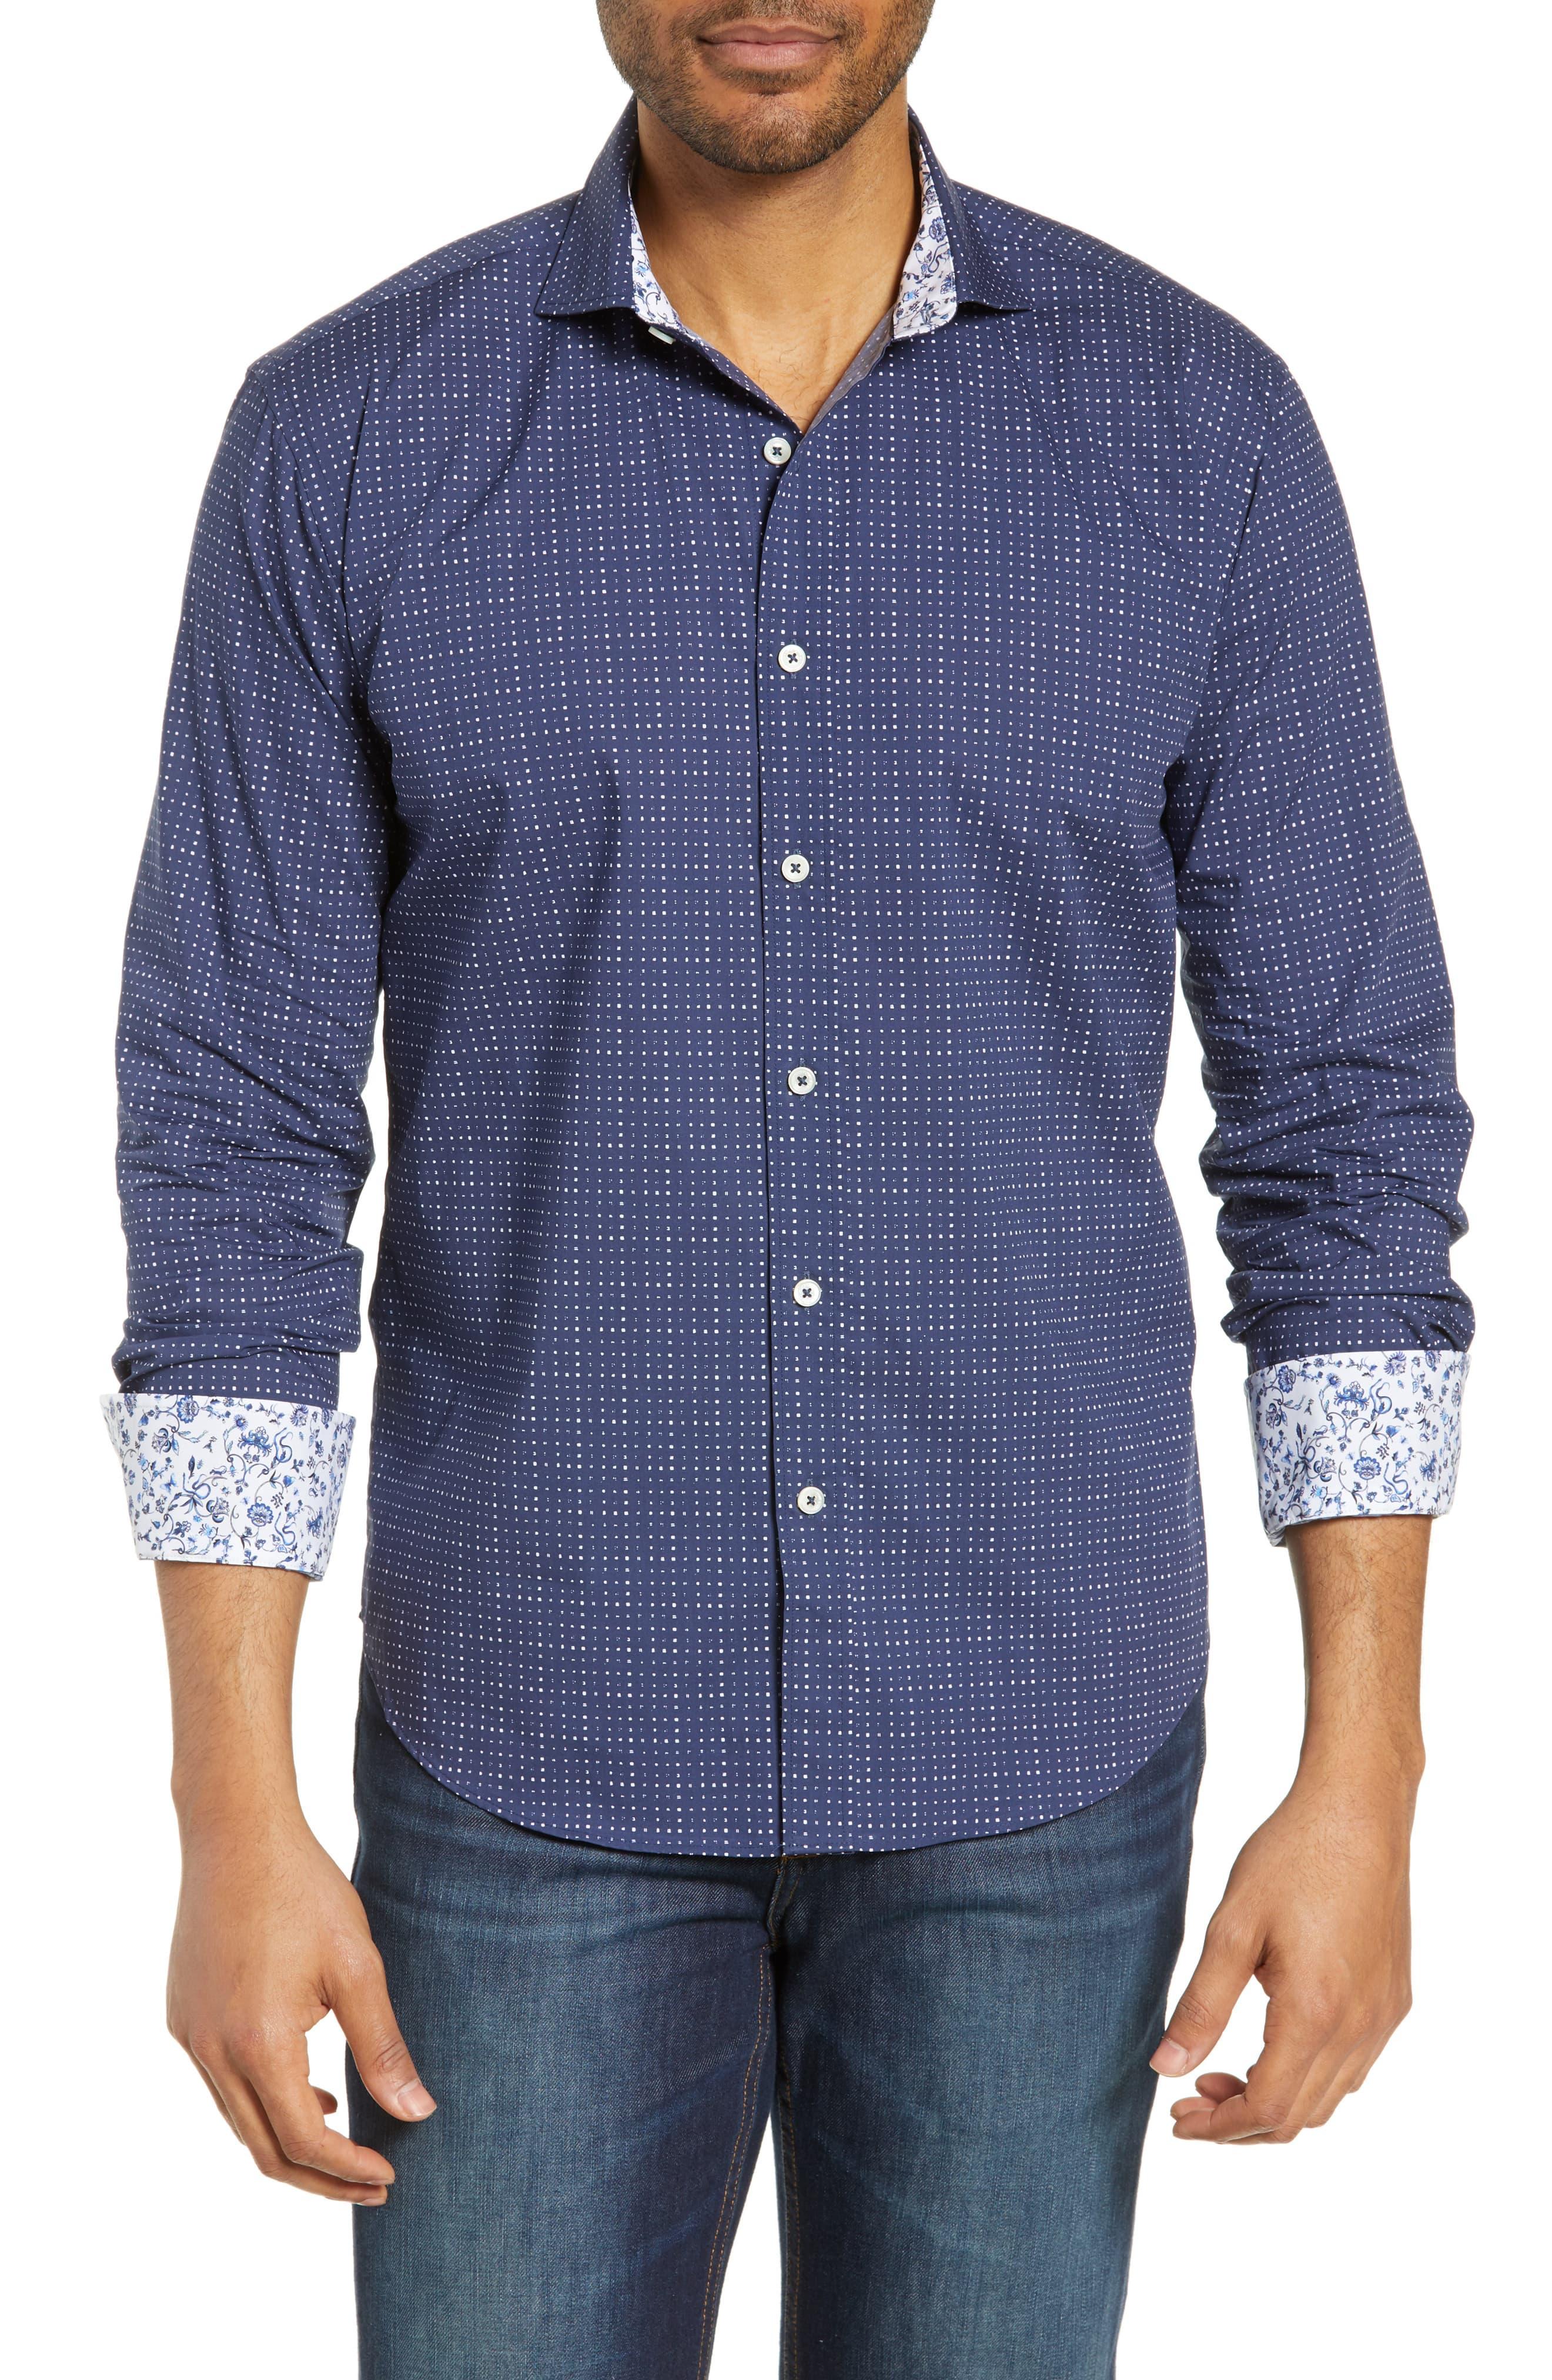 Bugatchi Shaped Fit Dot Cotton Sport Shirt in Blue for Men - Lyst